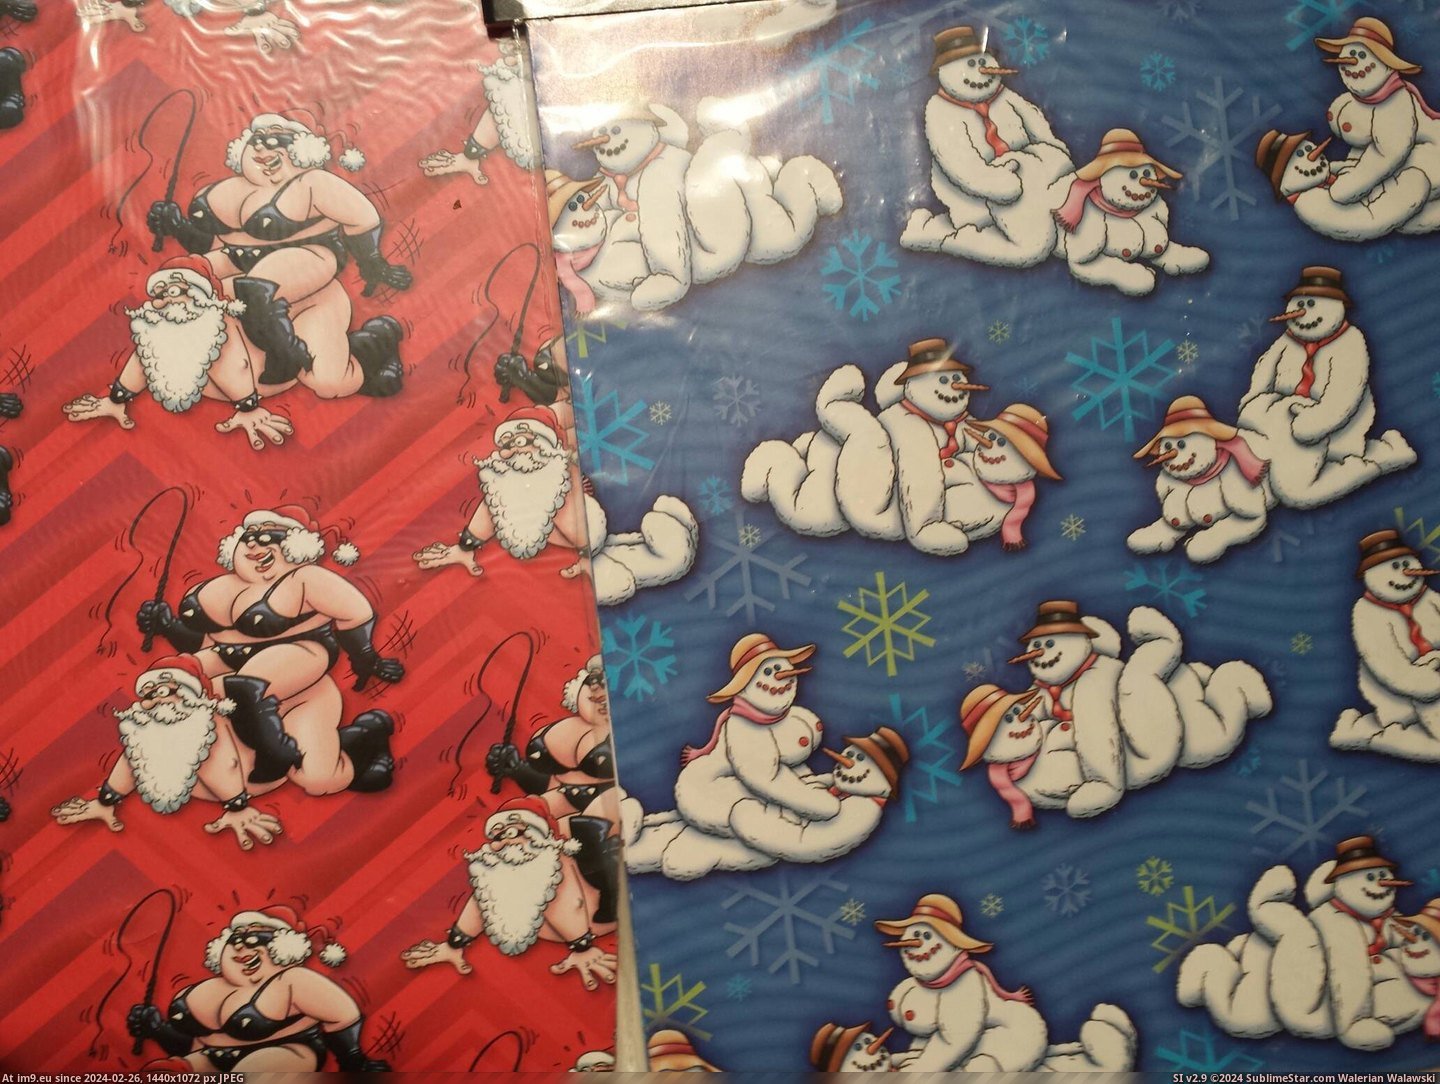 #Wtf #Christmas #Wrapping #Paper #Themed [Wtf] Nothing like some Christmas themed wrapping paper! Pic. (Изображение из альбом My r/WTF favs))